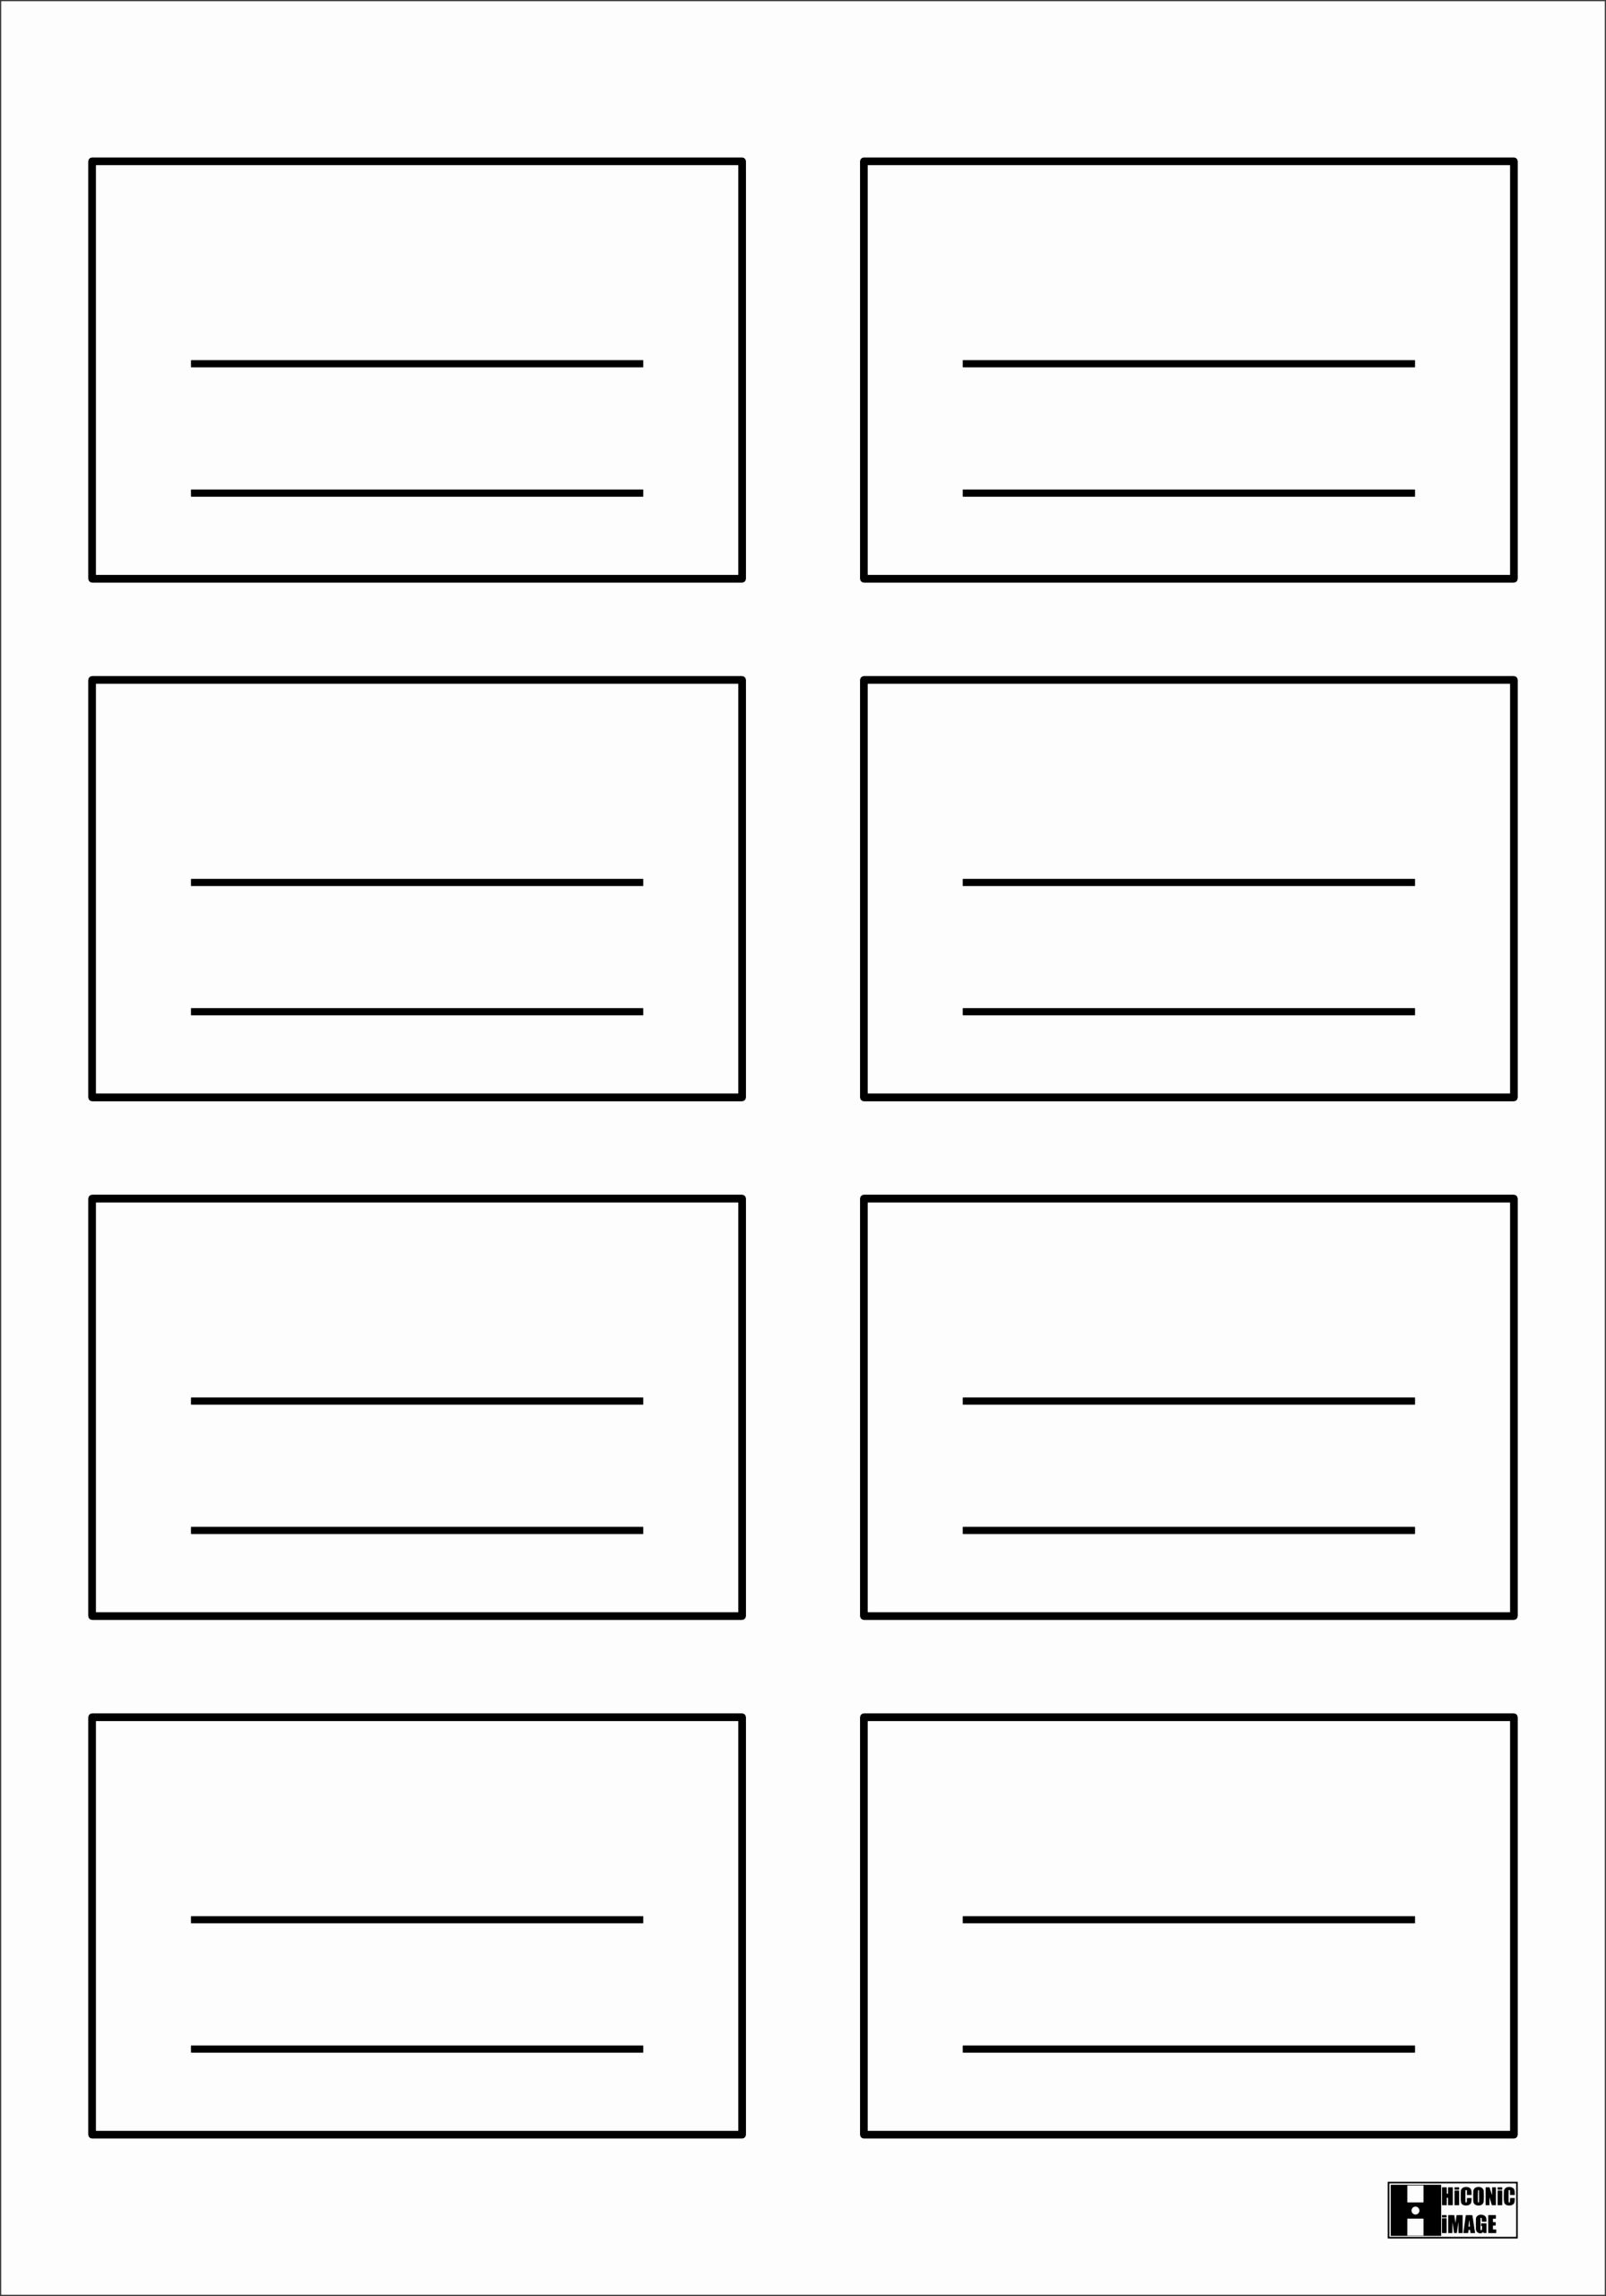 7 Free Name Card Template Microsoft Word - Sampletemplatess in Postcard Templates For Word